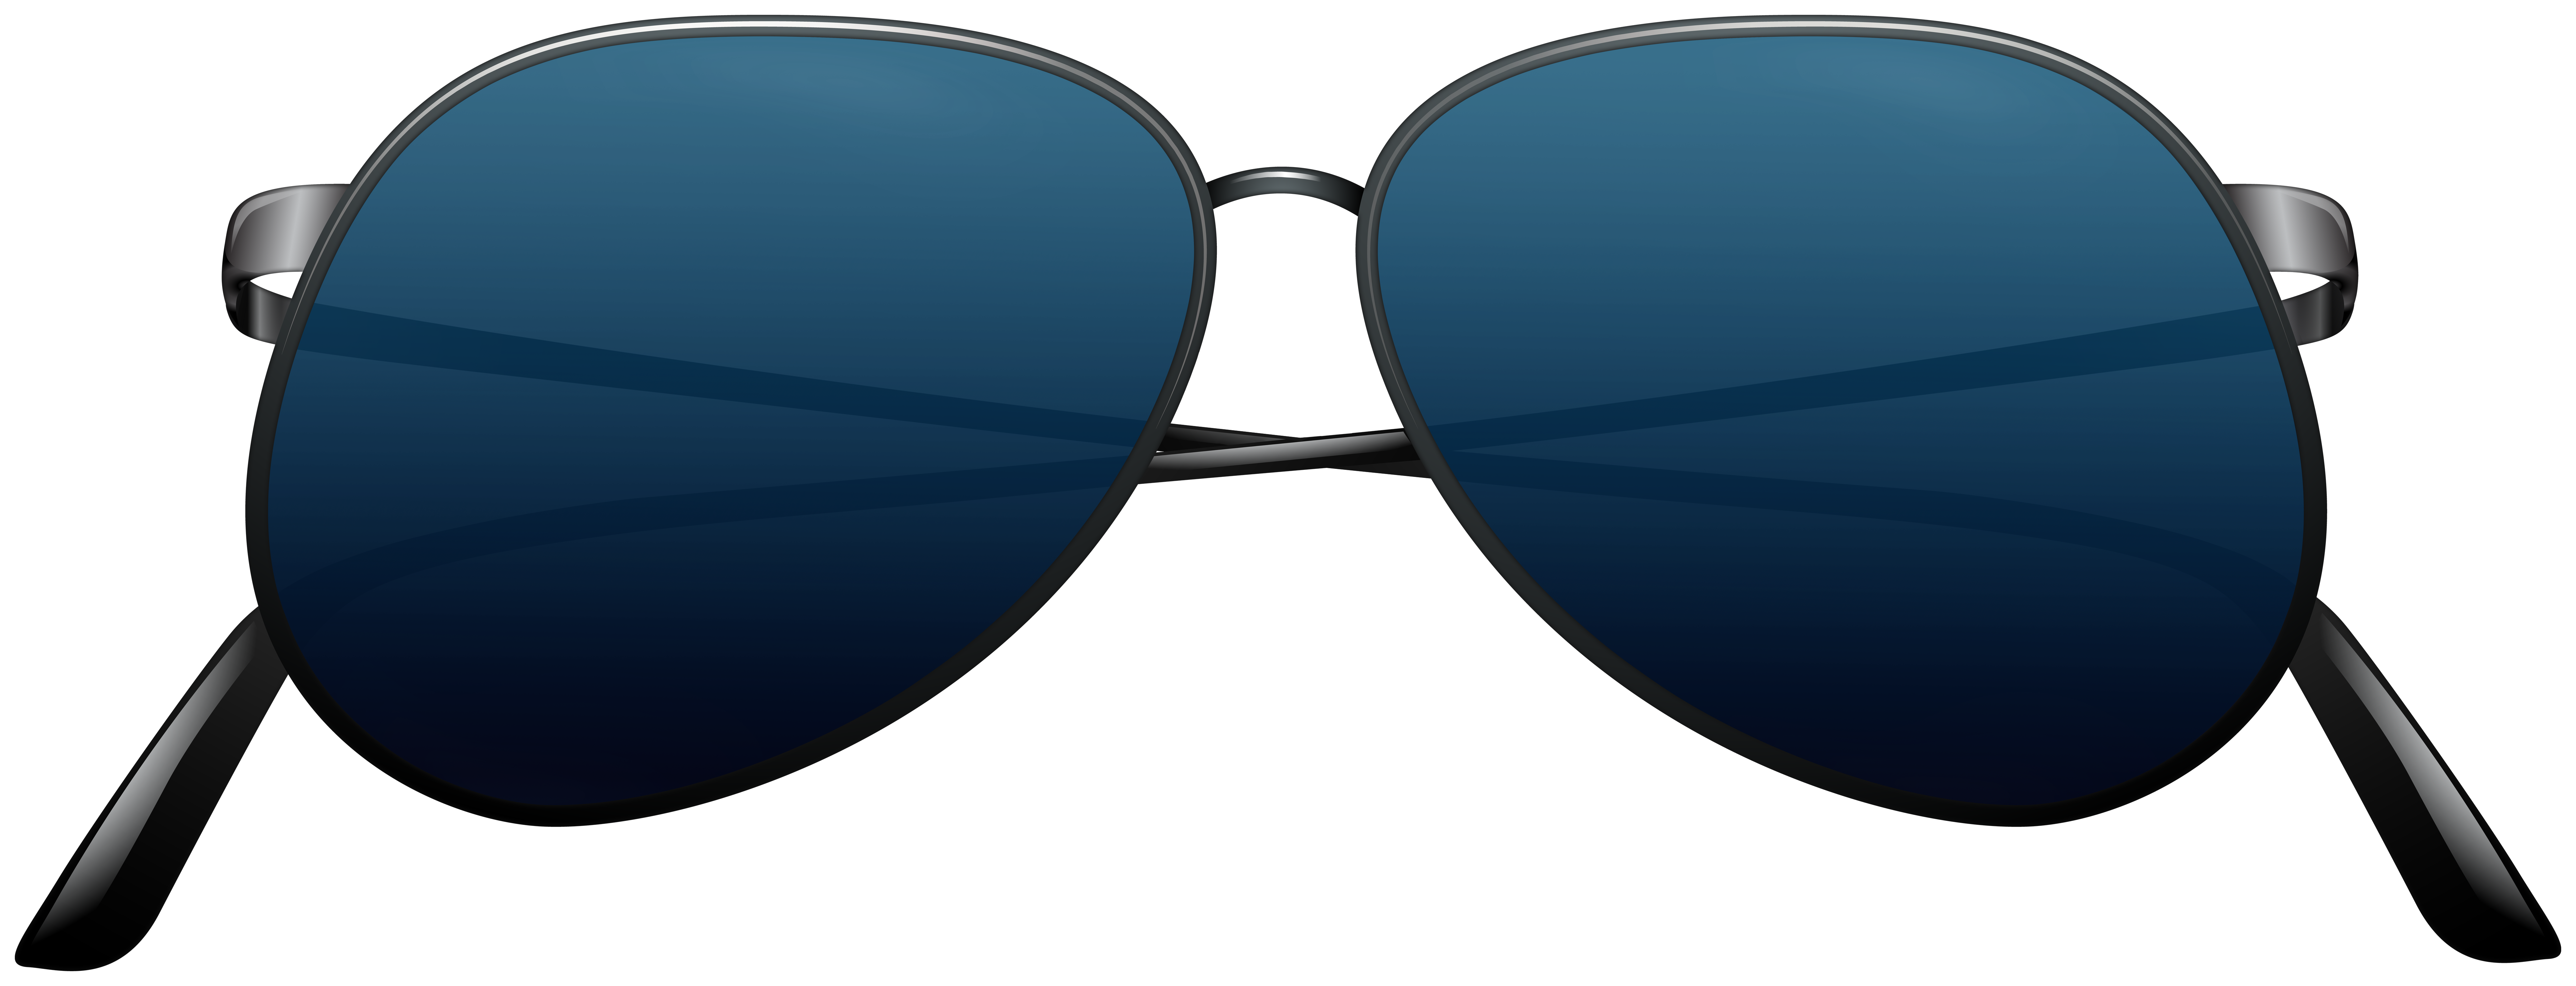 Aviator Sunglasses Blue Png Clipart Gallery Yopriceville High Quality Images And Transparent Png Free Clipart